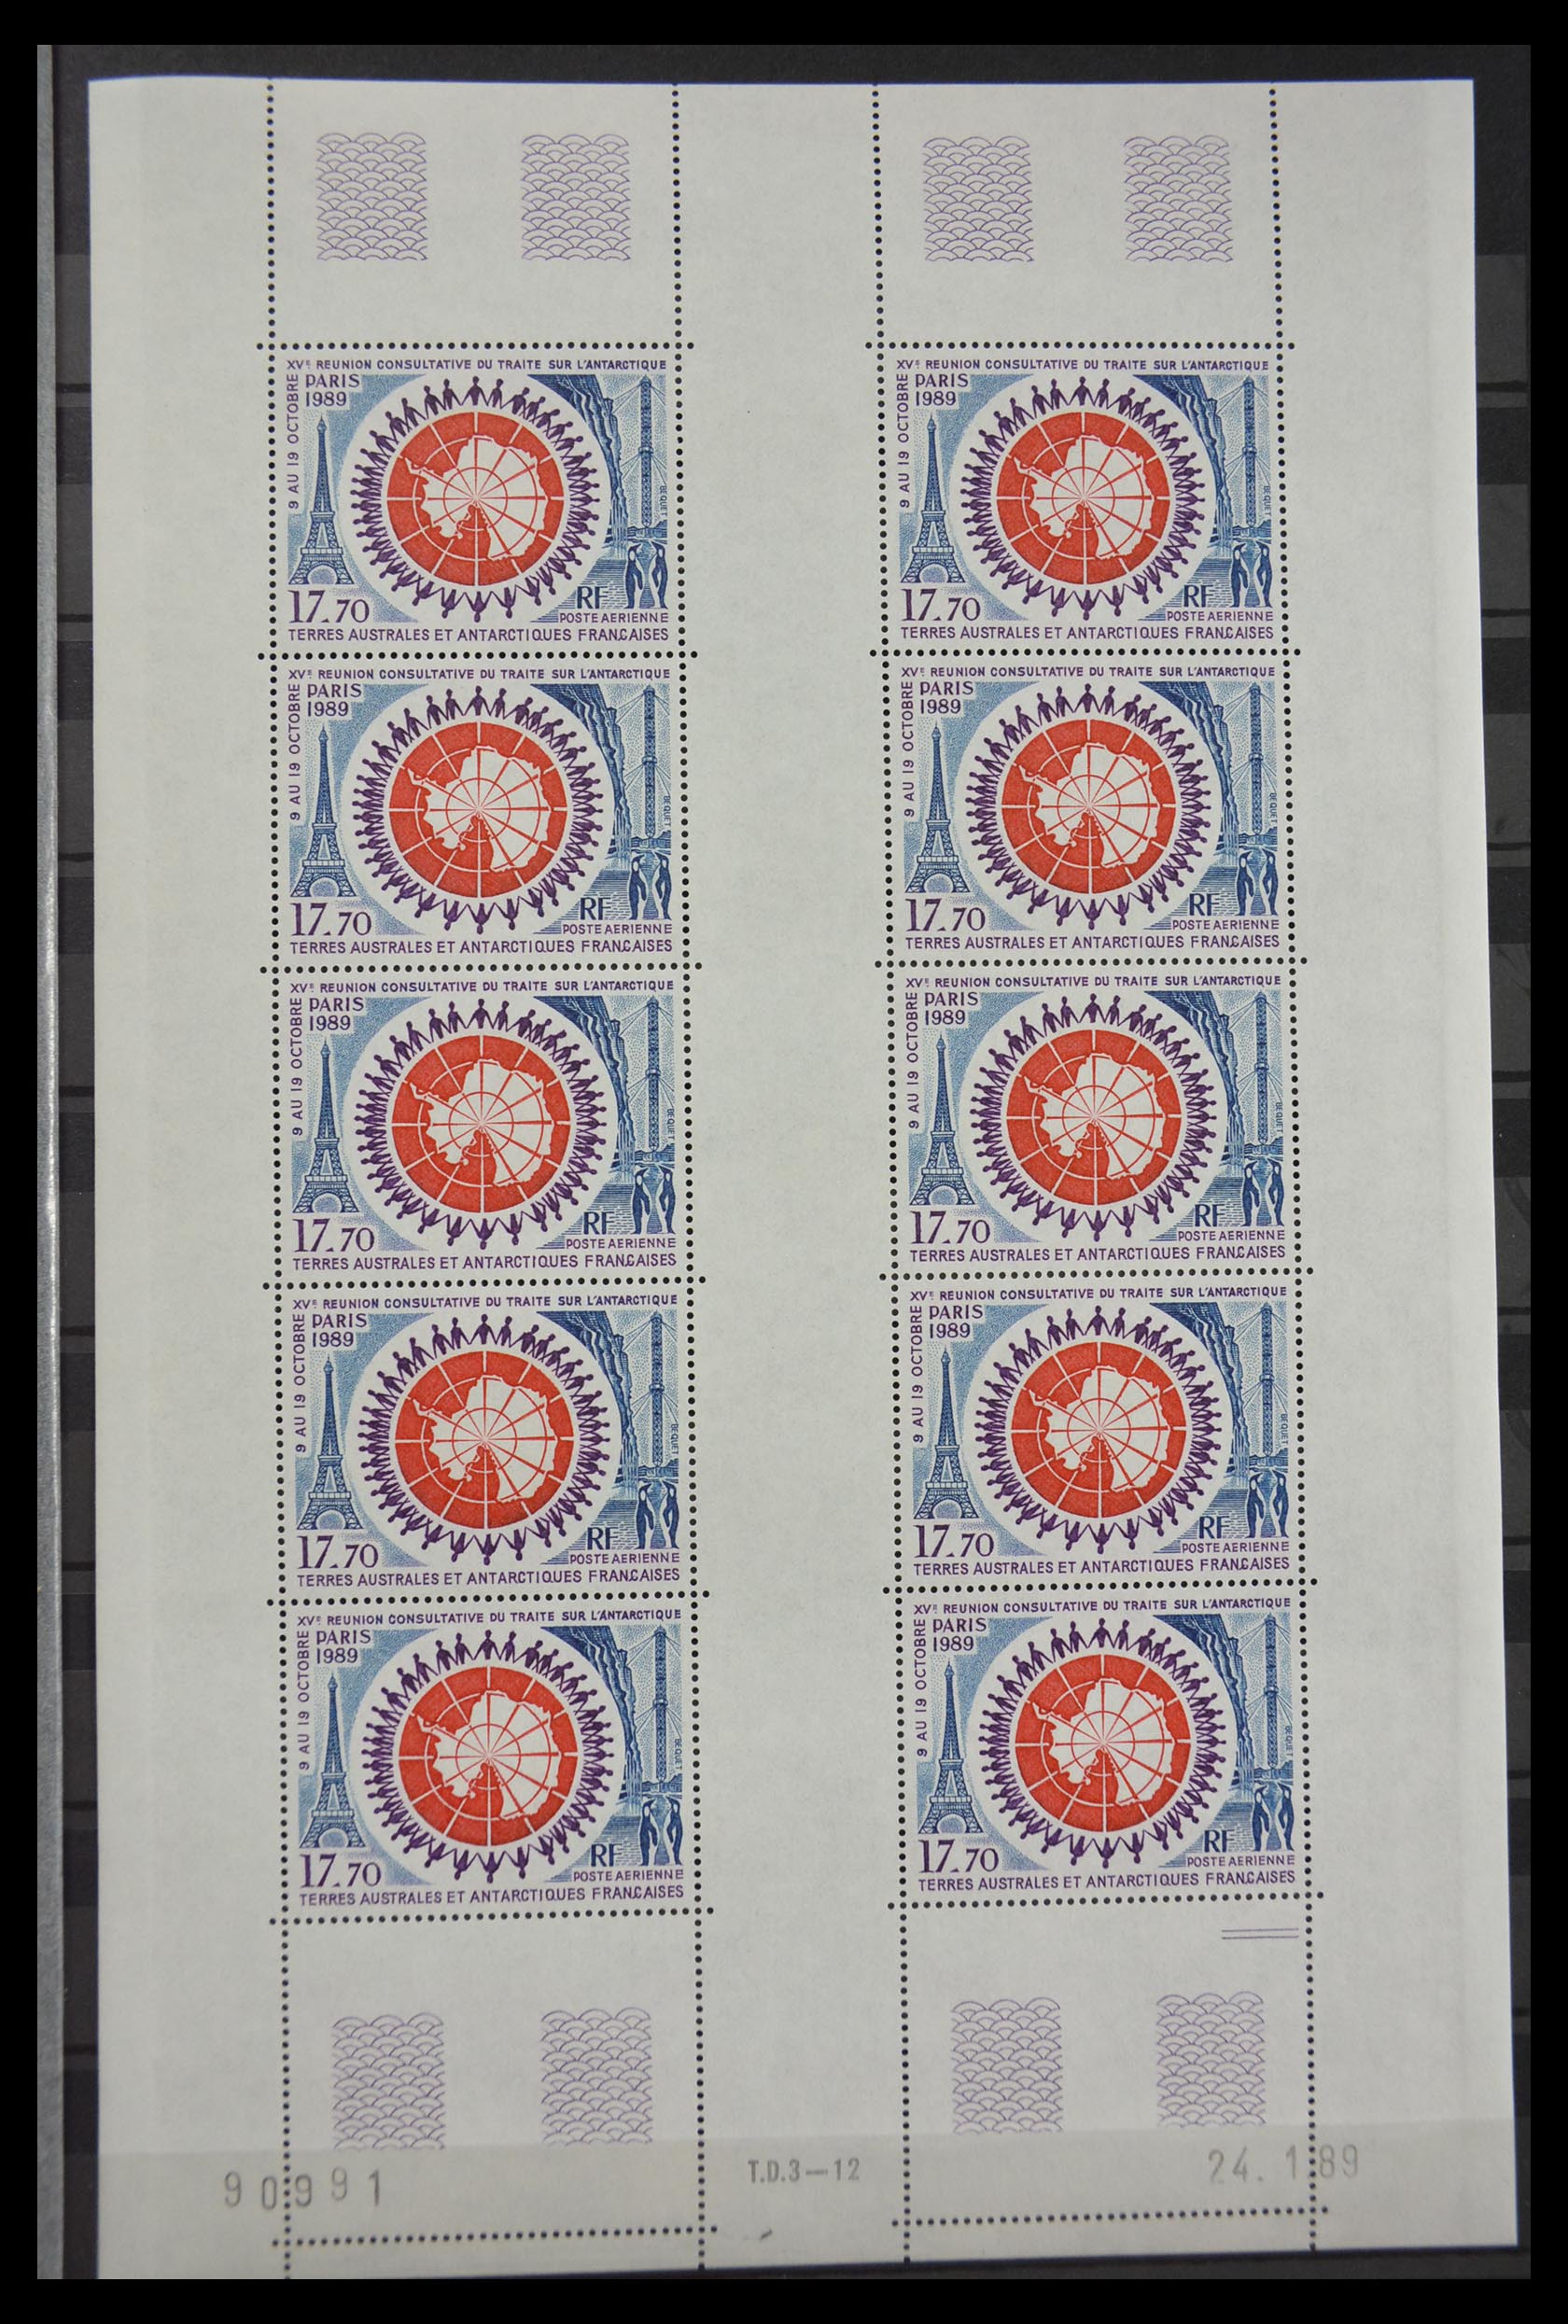 29940 567 - 29940 Great Britain and Colonies 1920-1970.